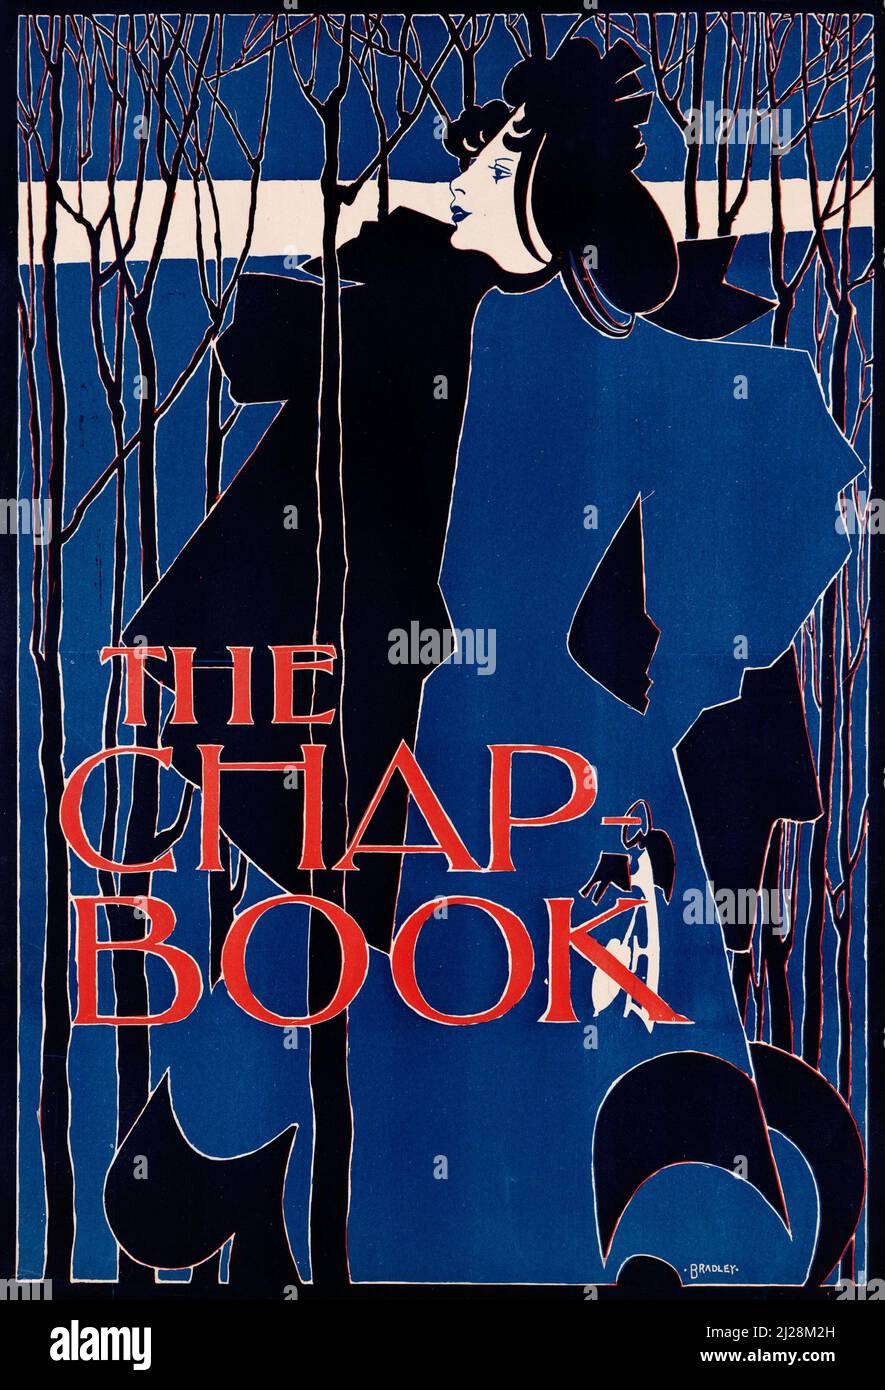 Will Bradley Artwork - The CHAP Book (1894) American Art Nouveau - Old and vintage Poster / Magazine Cover. Stockfoto